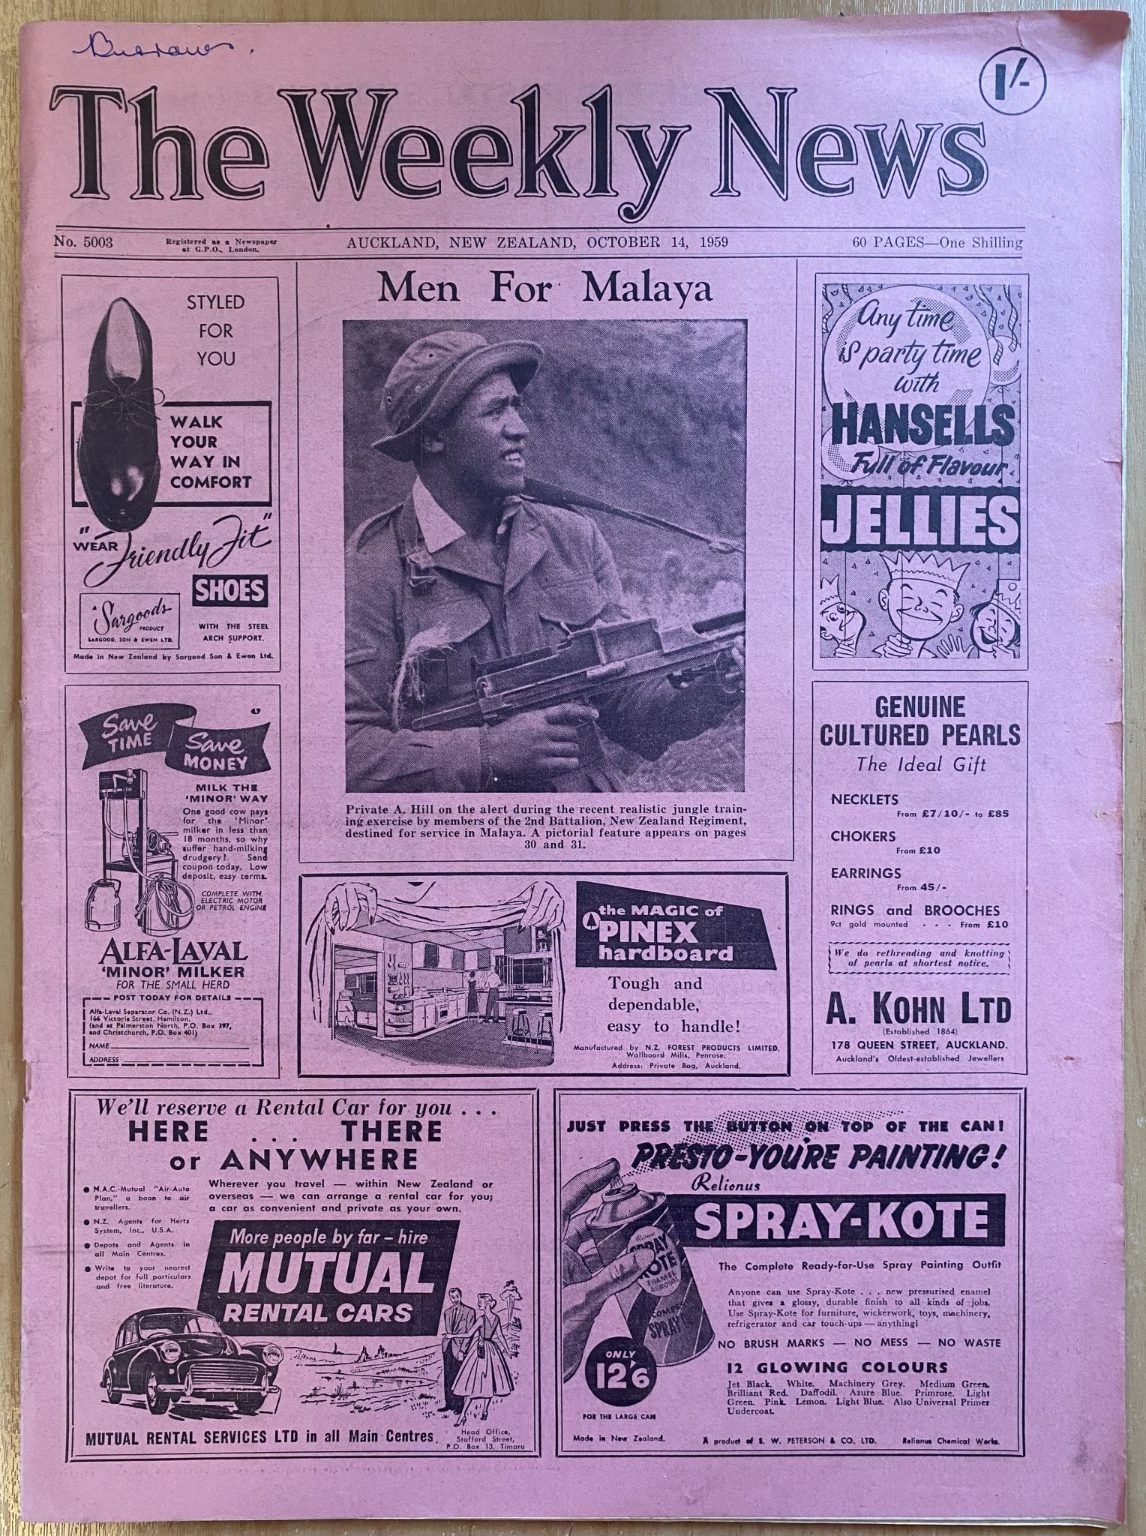 OLD NEWSPAPER: The Weekly News - No. 5003, 14 October 1959